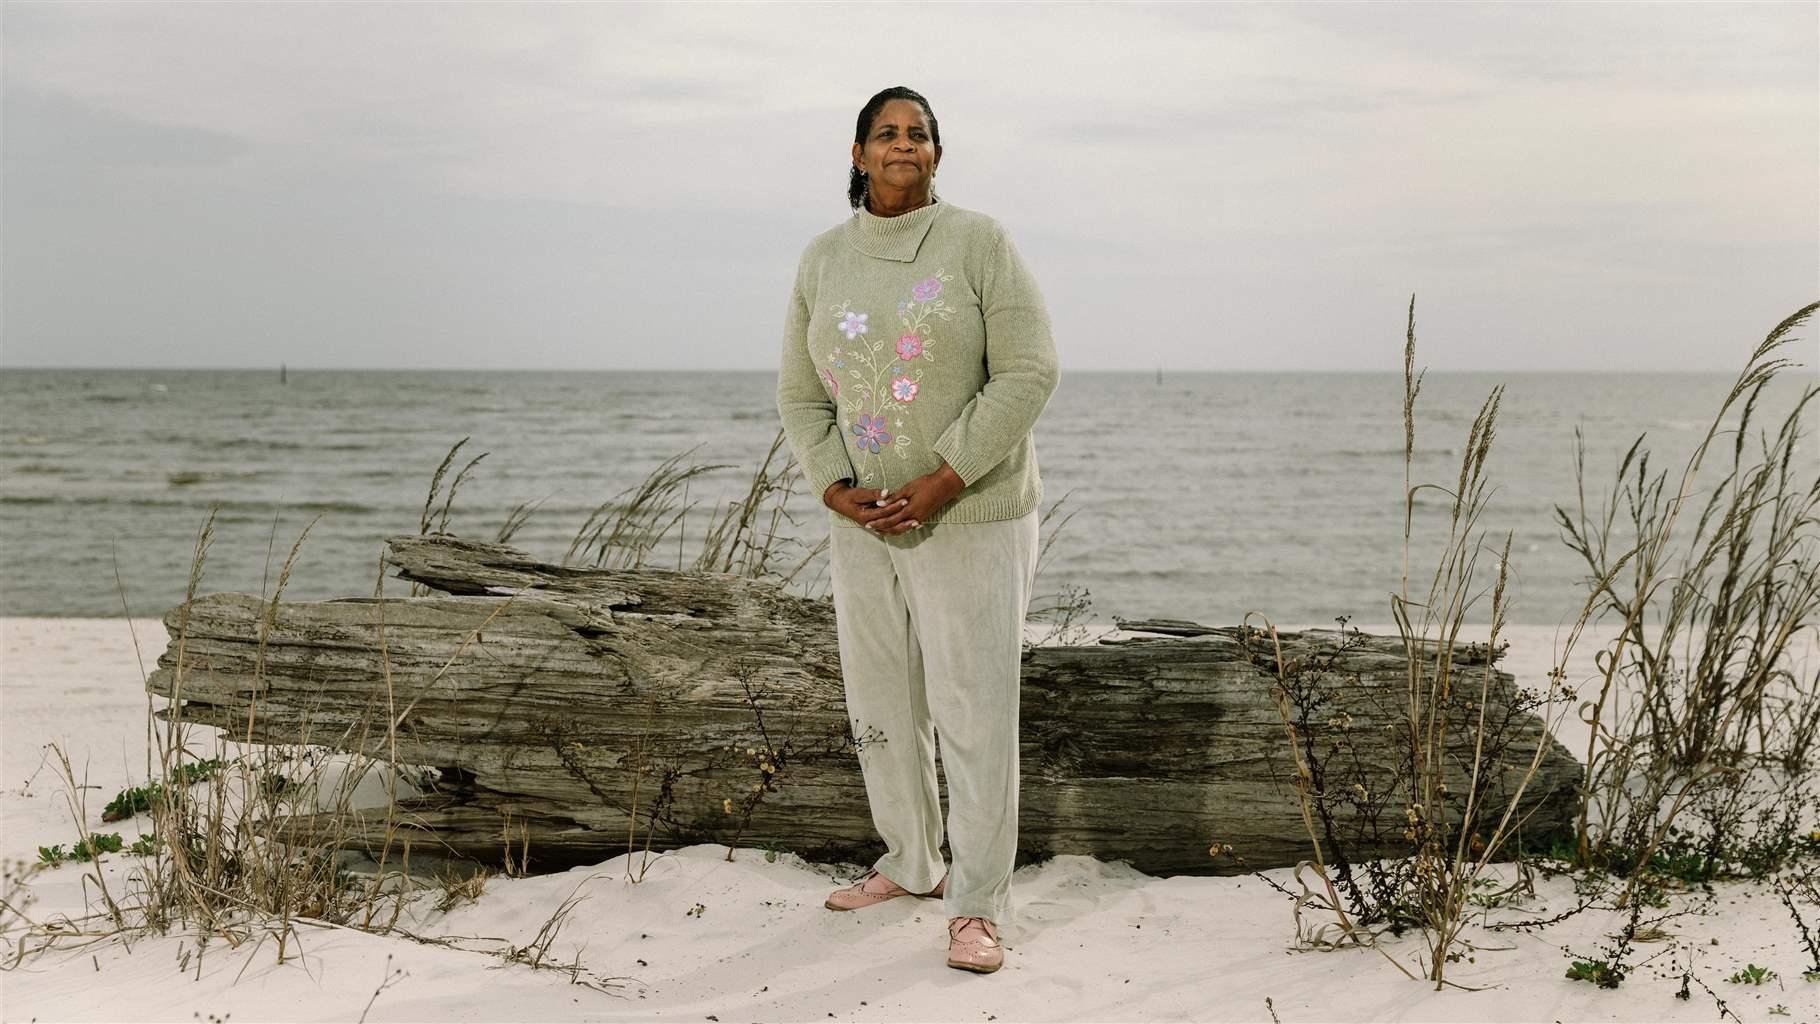 Environmental justice advocate Katherine Egland stands on a beach in her home state of Mississippi. 